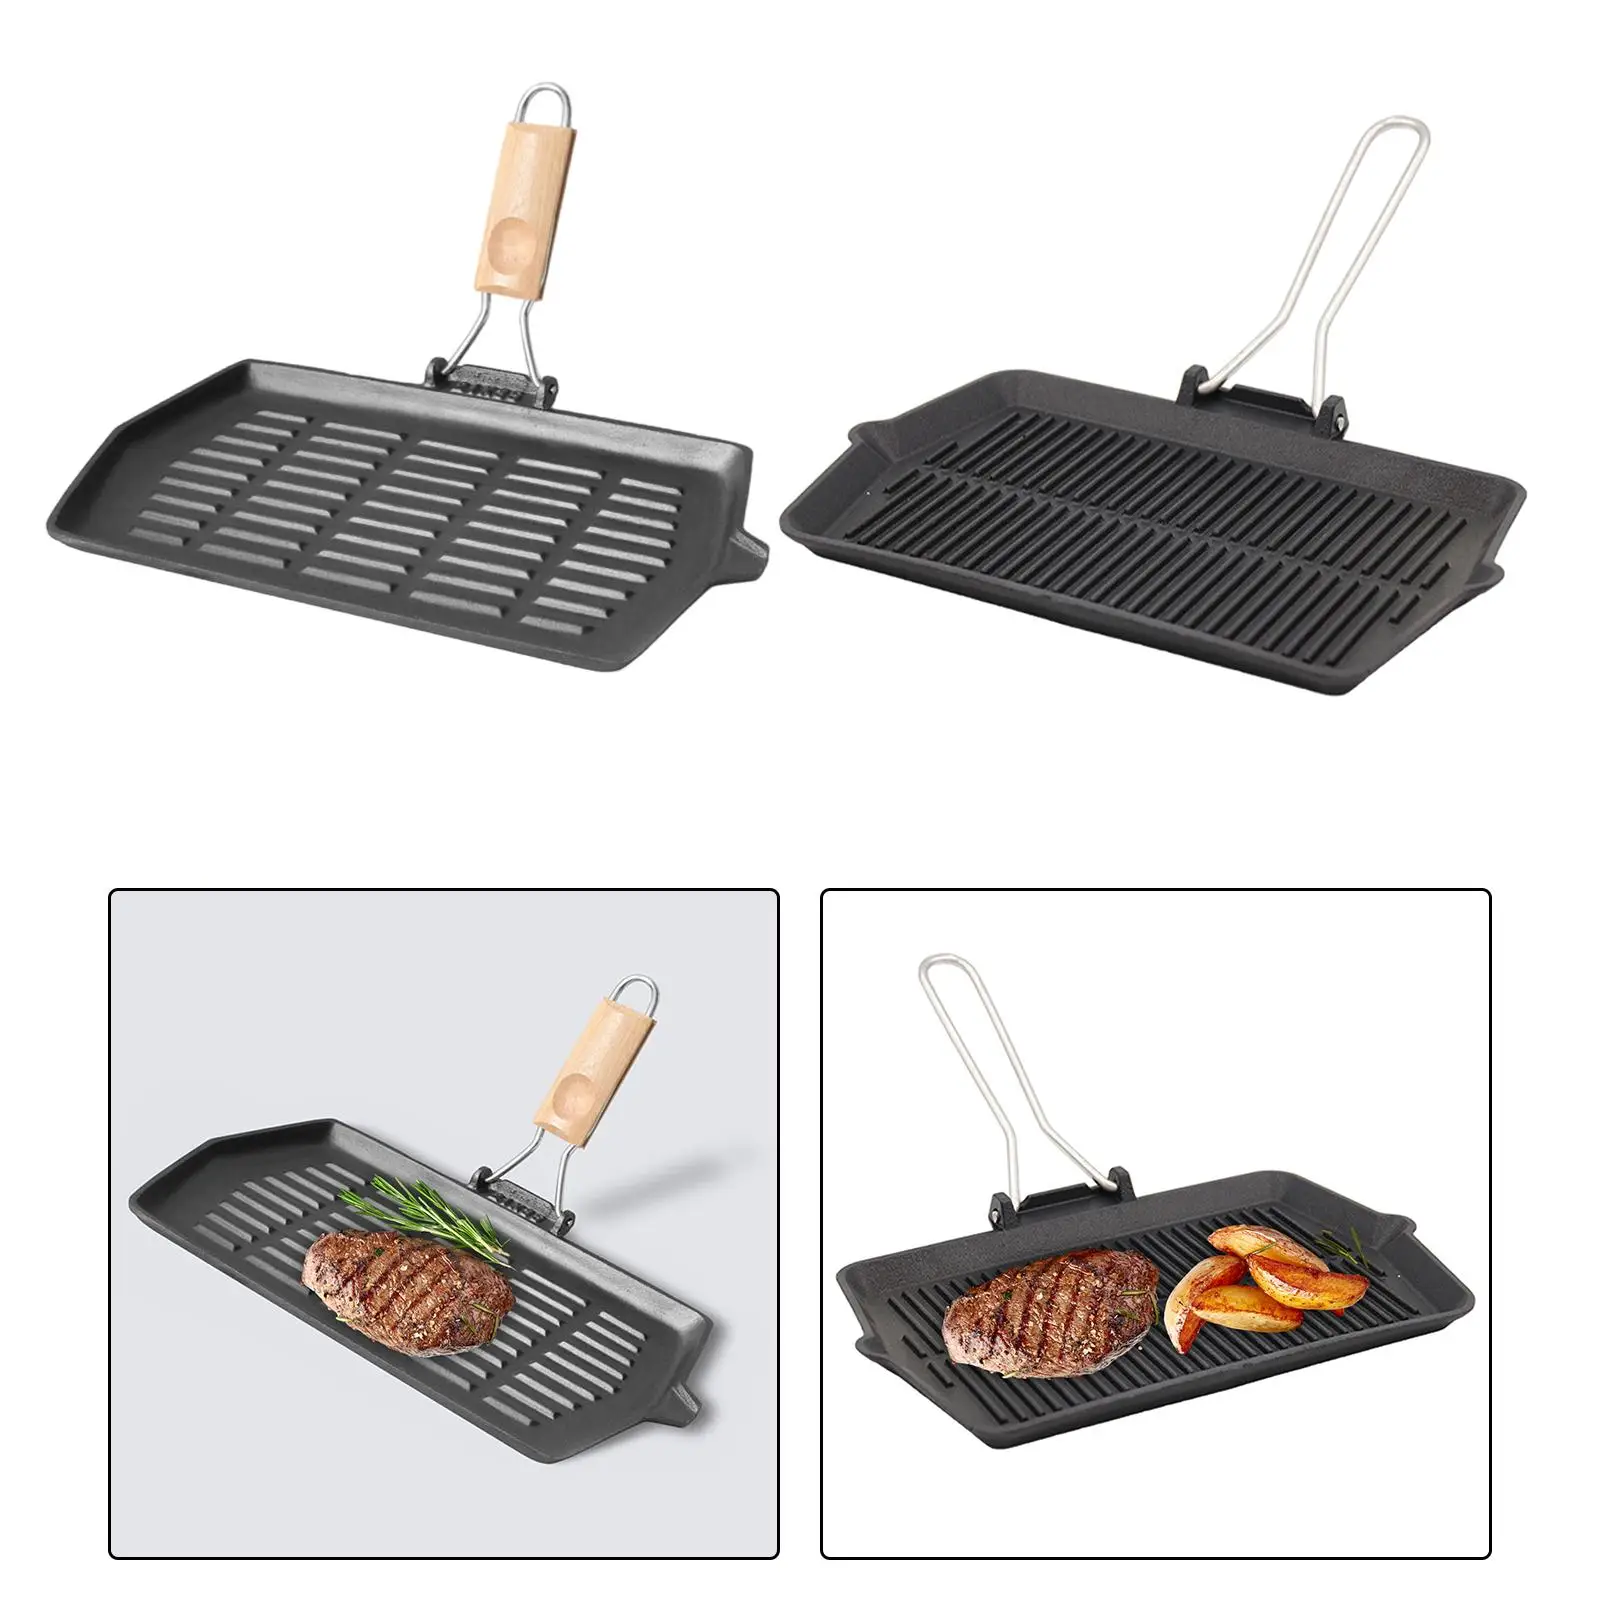 Steak Pan for Meat, Fish and Vegetables Grill Pan Frying Pan Griddle Pan for Restaurant Indoor Outdoor Household Kitchen